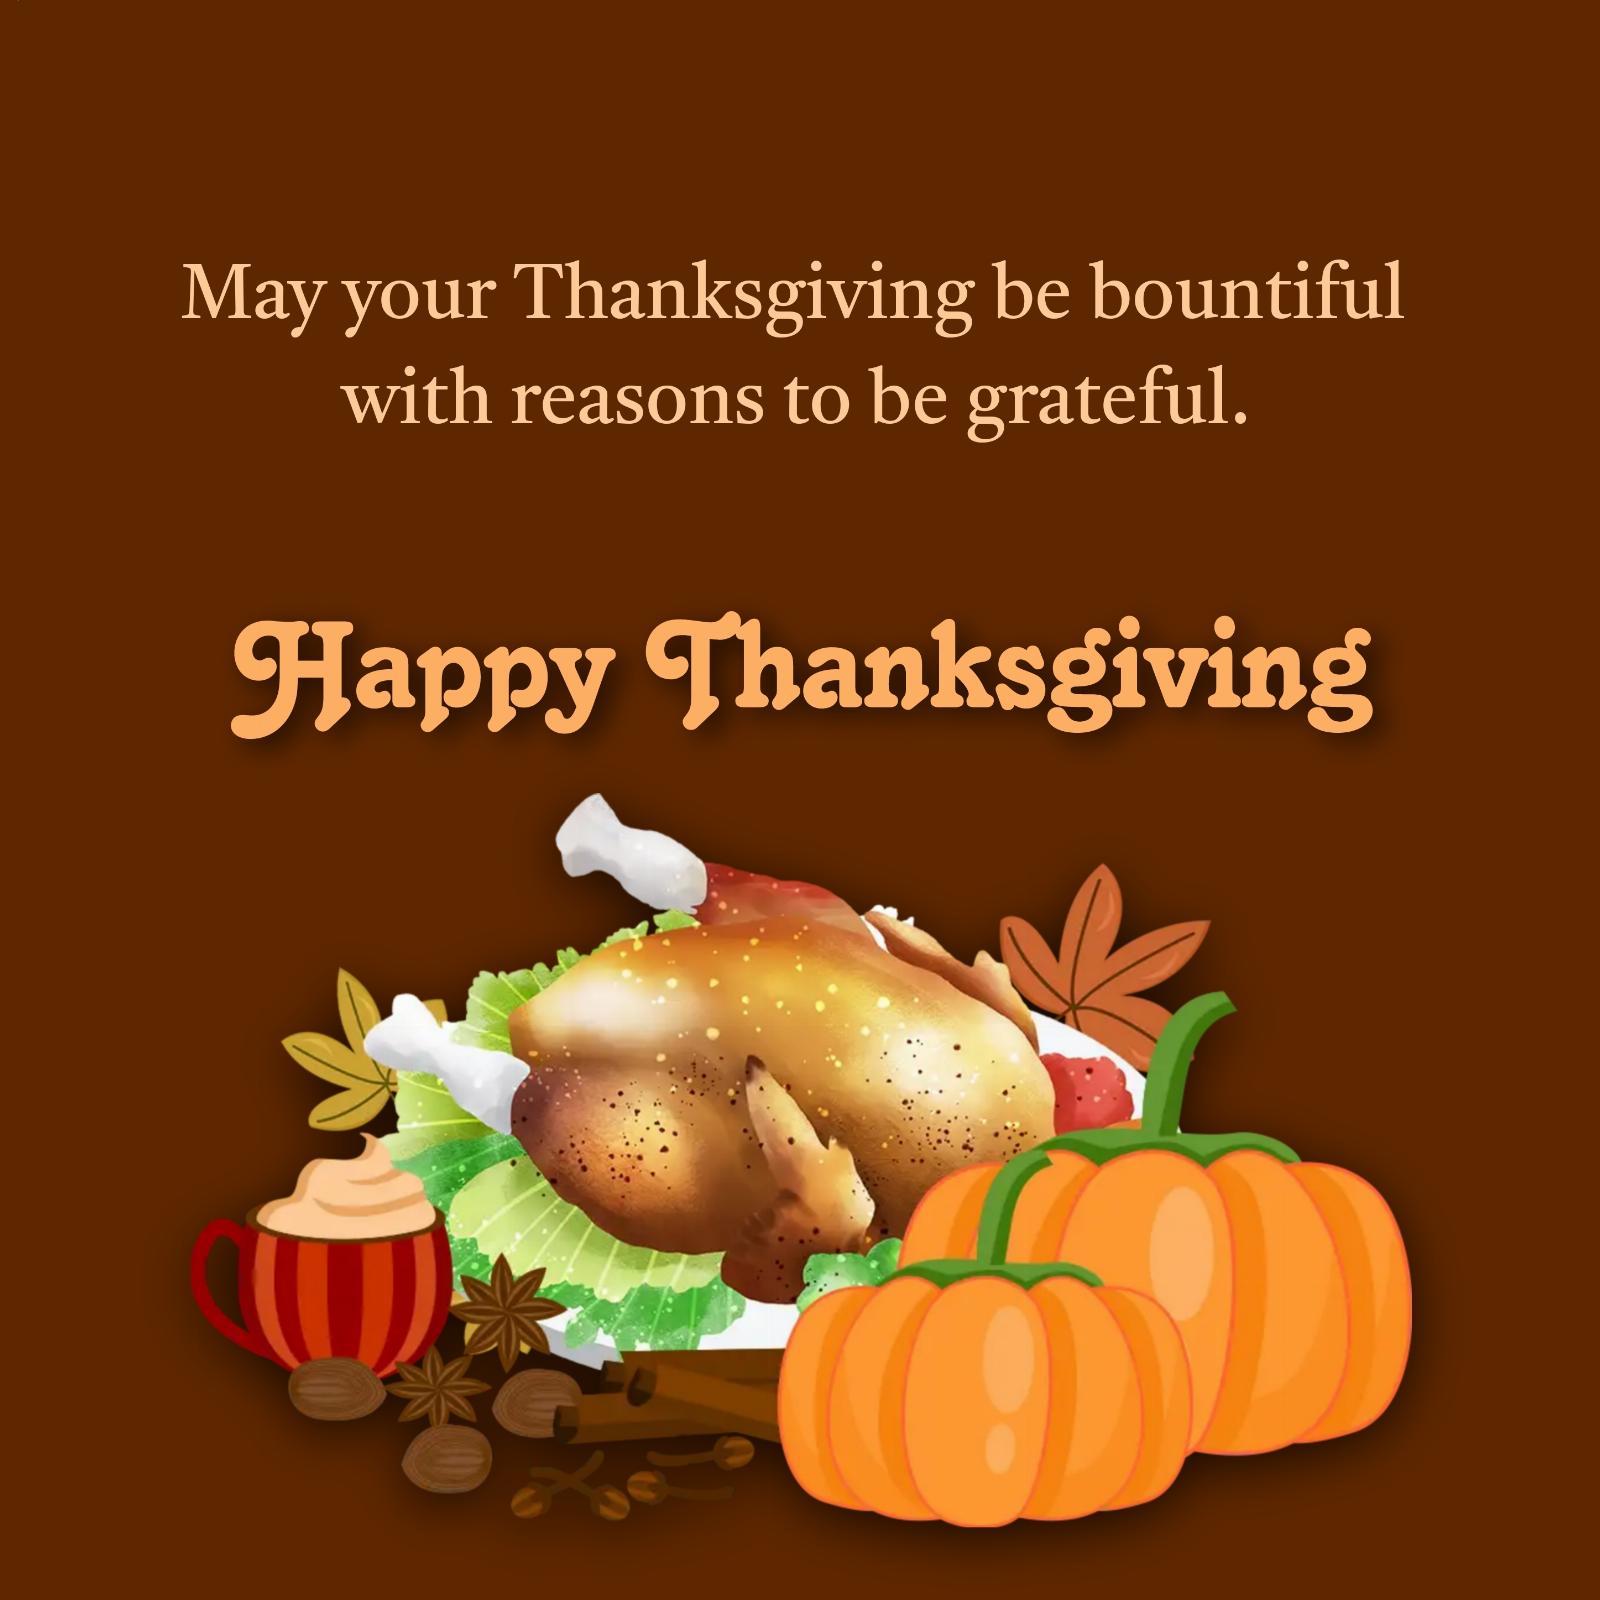 May your Thanksgiving be bountiful with reasons to be grateful